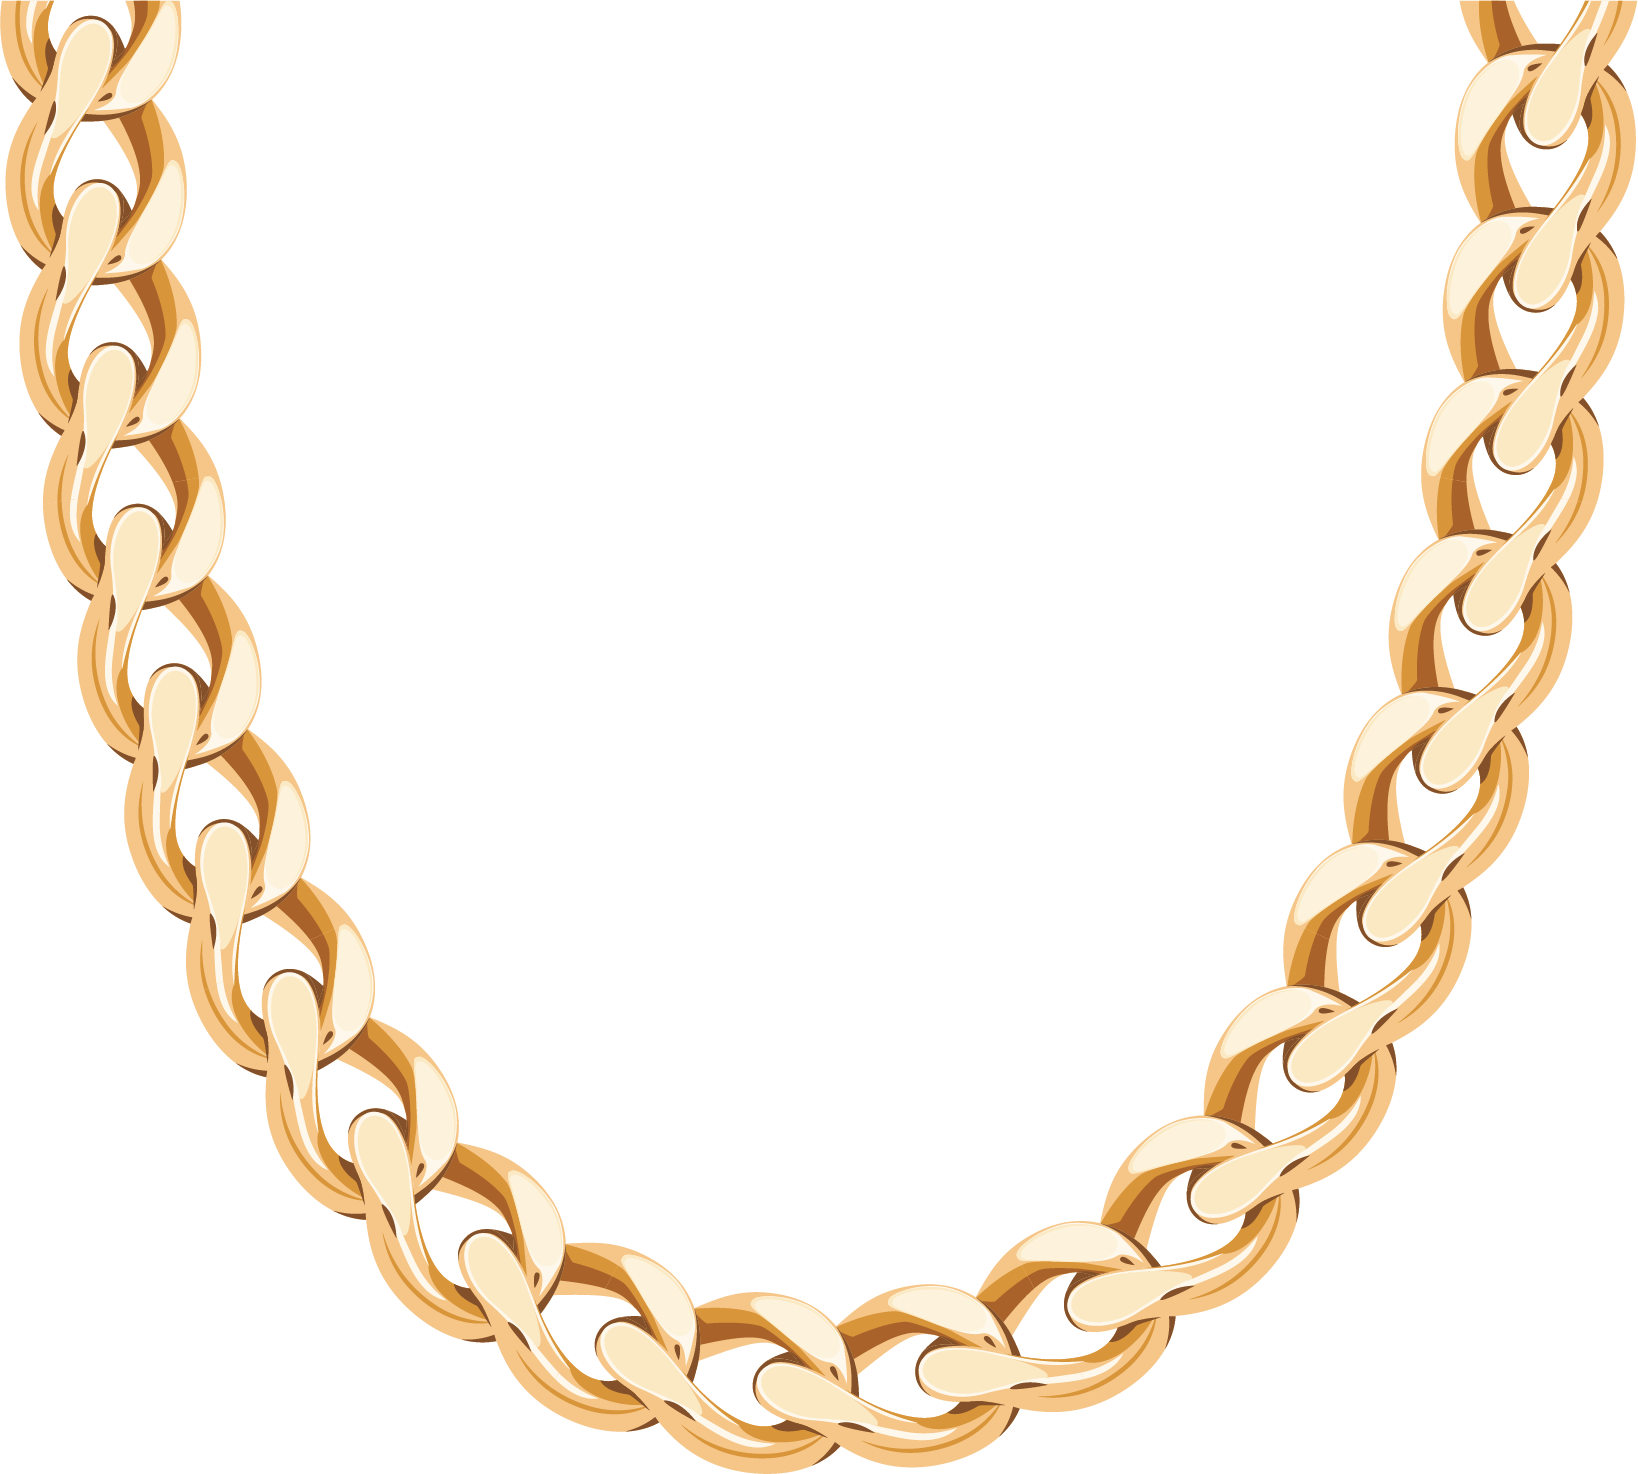 Gents Golden Chain PNG High-Quality Image